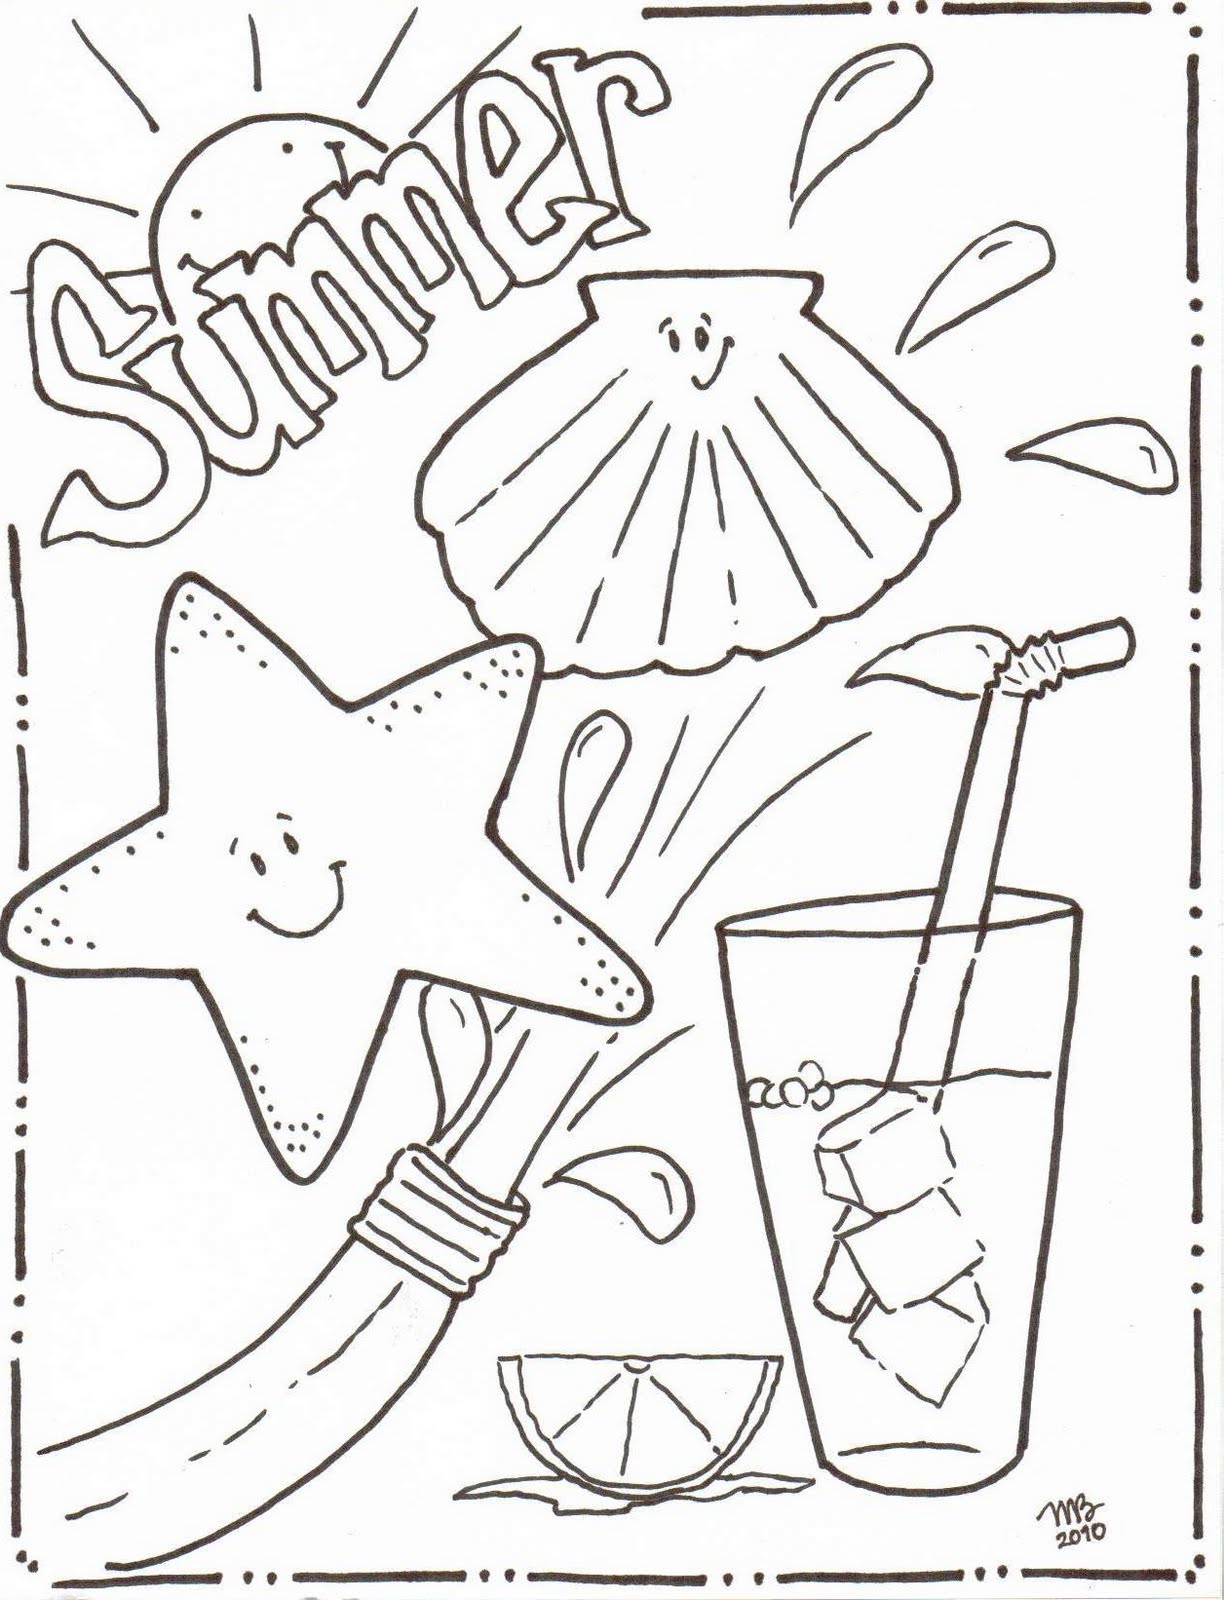 Download Free Download Summer Coloring Pages 57summercoloringpagesprintable Pictures 1224x1600 For Your Desktop Mobile Tablet Explore 46 Wallpaper Coloring Pages Color Your Own Wallpaper Color Me Wallpaper Coloring Book Wallpaper